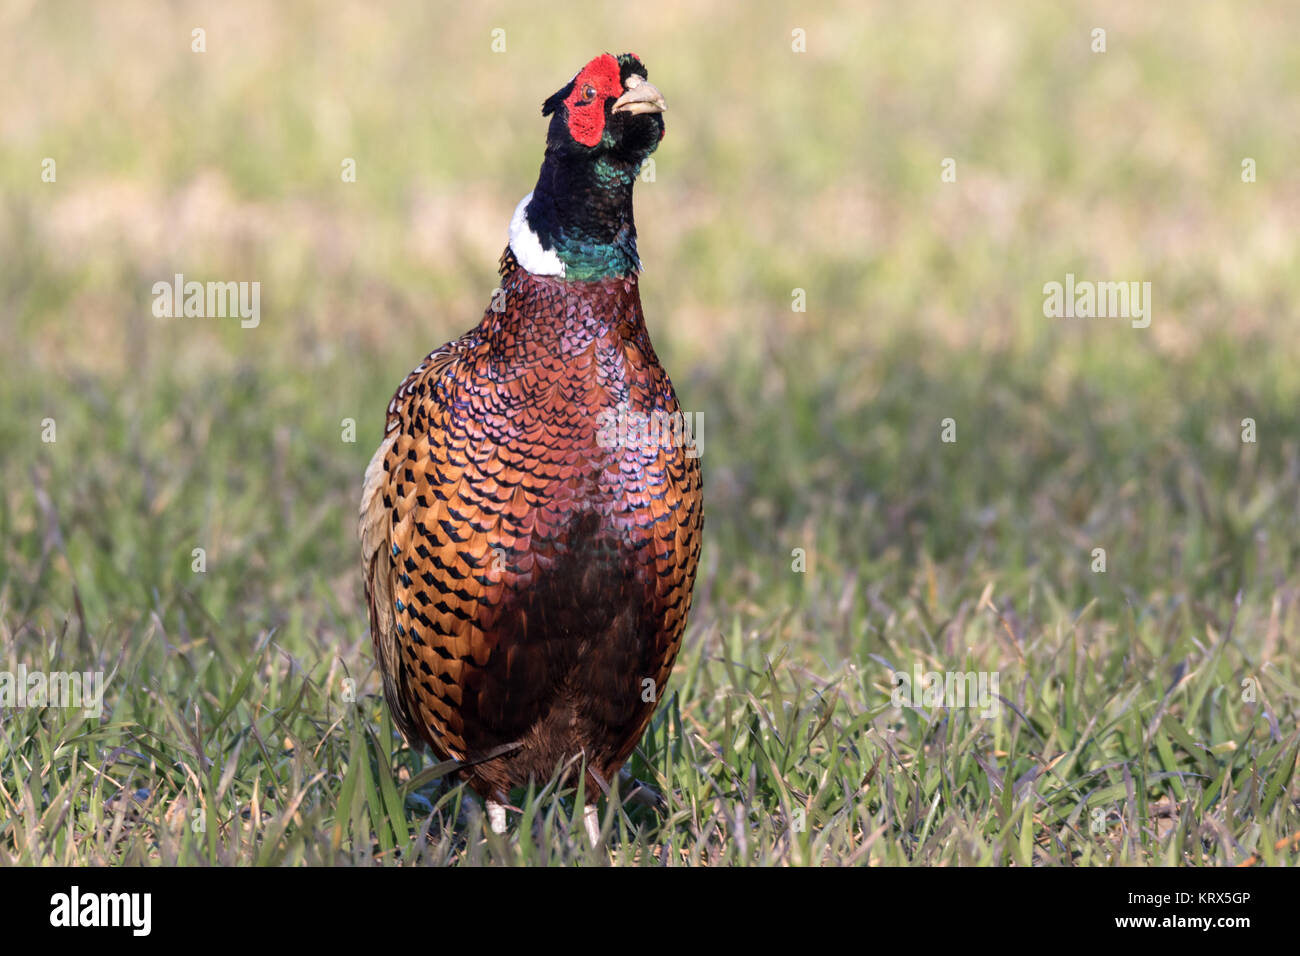 Pheasant in a field Stock Photo